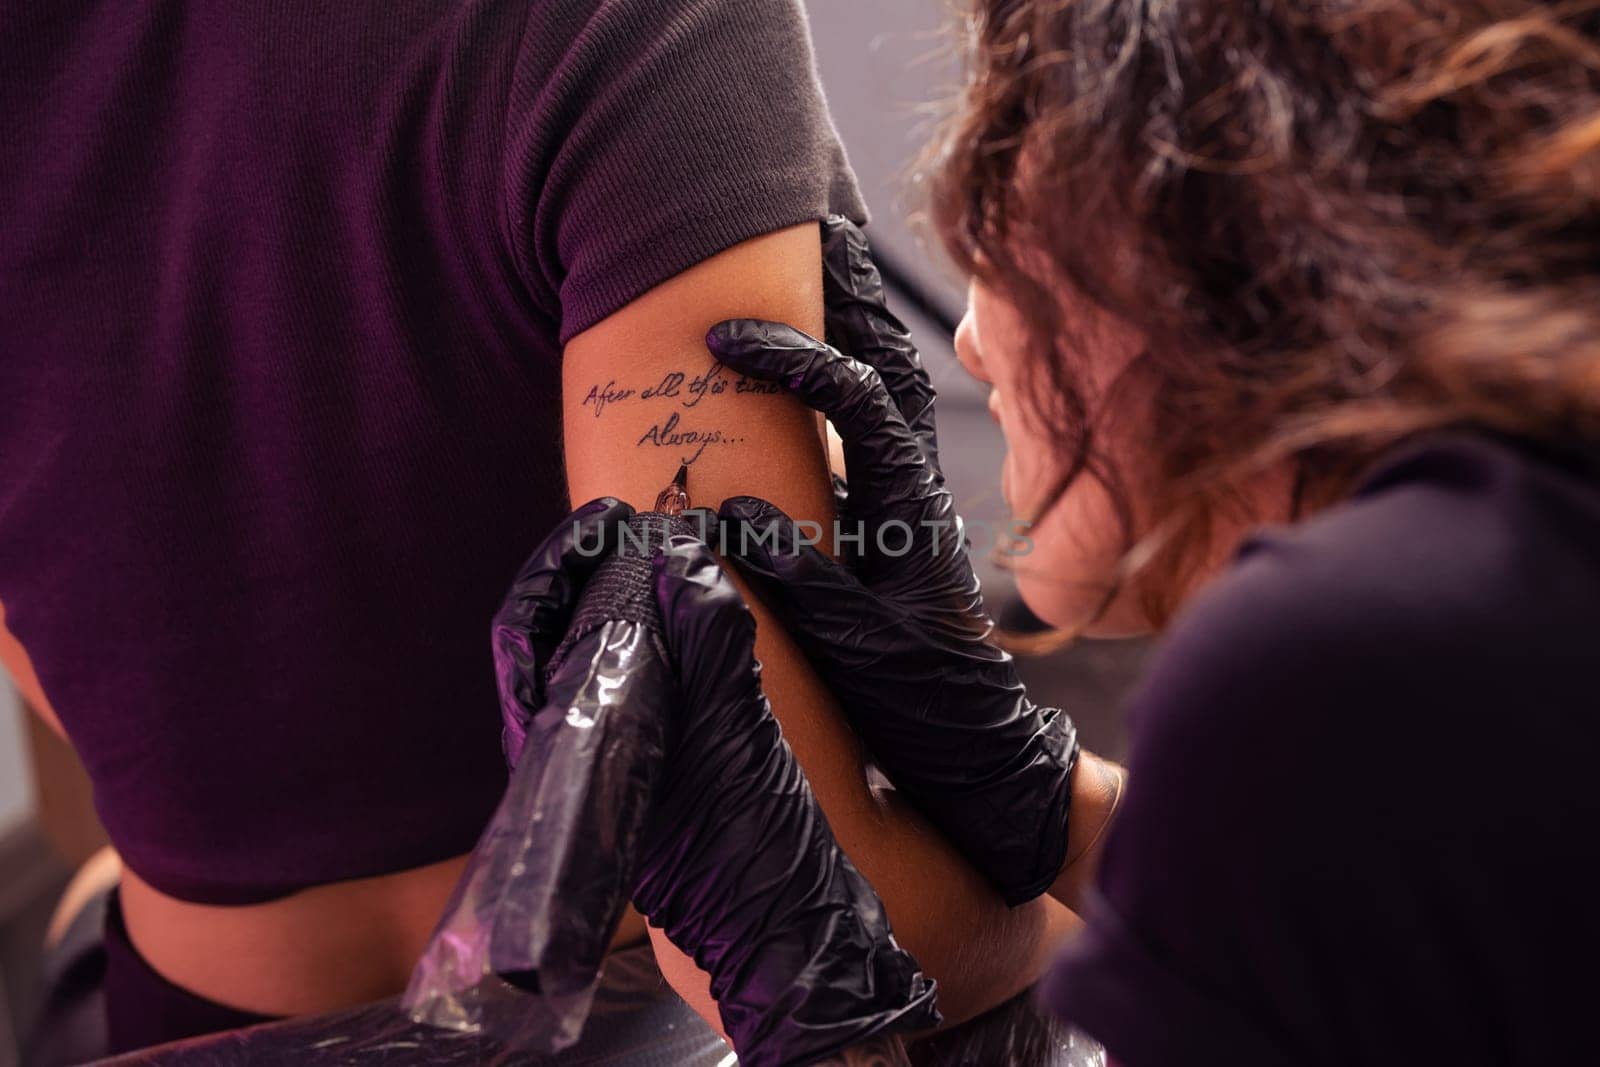 Talented artist crafting personalized lettering tattoo on female arm by nazarovsergey